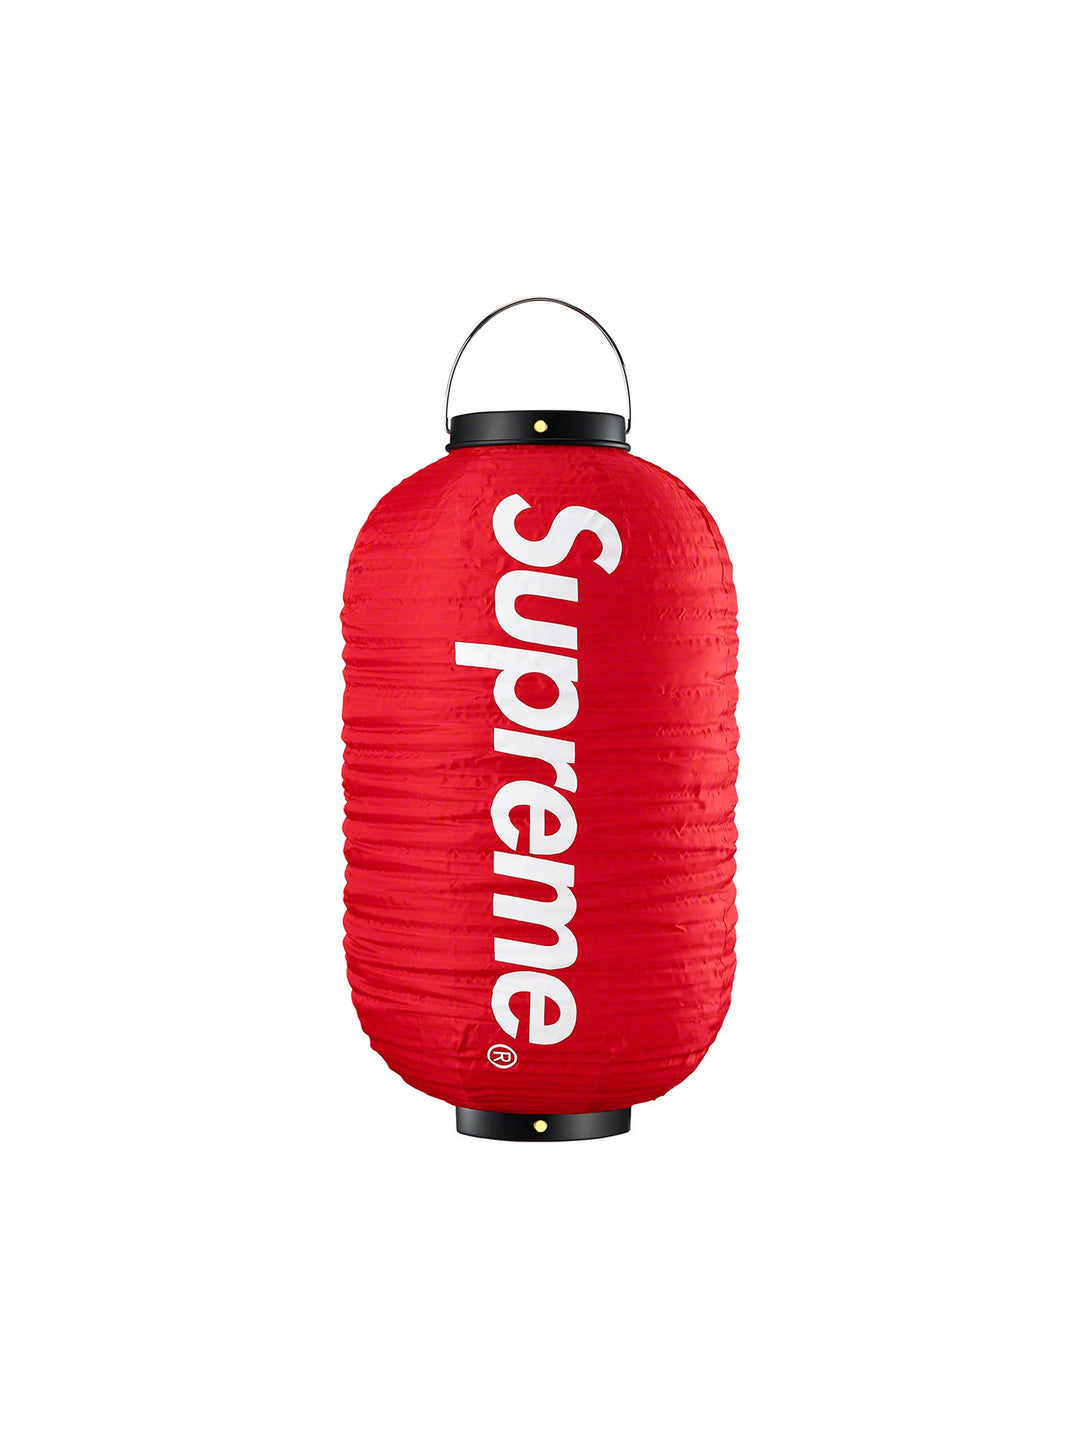 Supreme Hanging Lantern Red in Auckland, New Zealand - Shop name